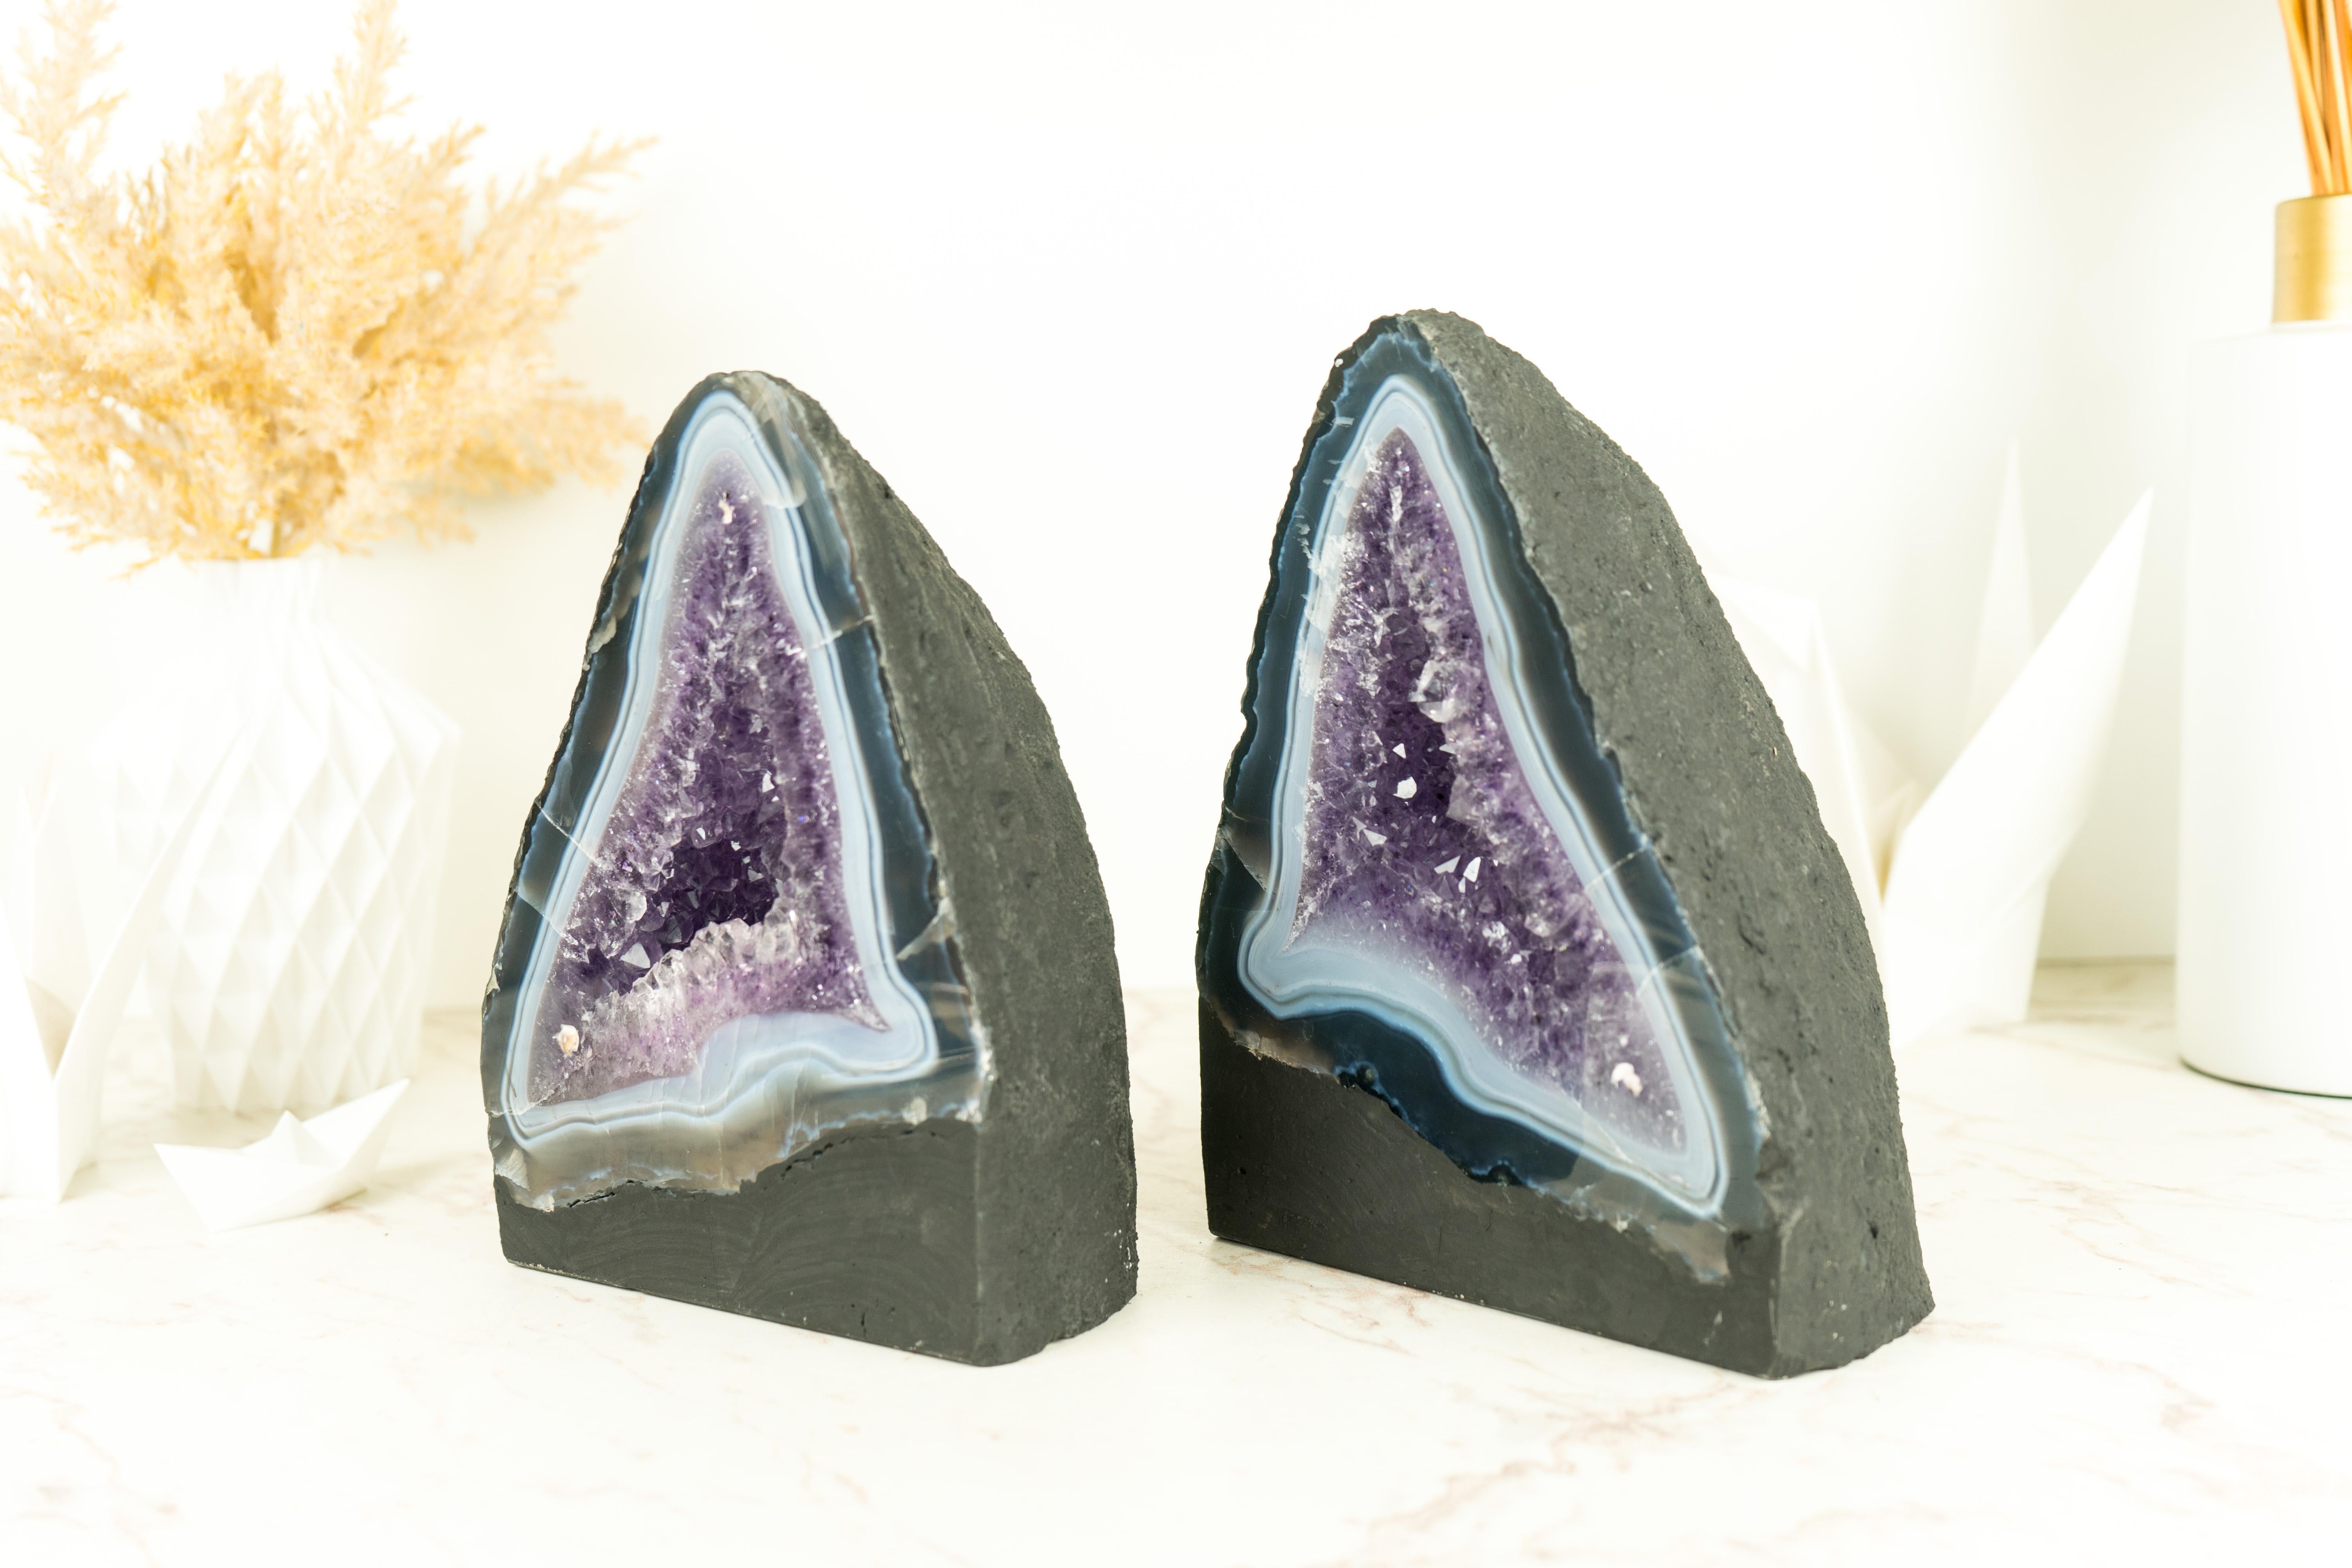 Pair of Book-Matching Blue Lace Agate Geodes with Crystal Amethyst For Sale 6